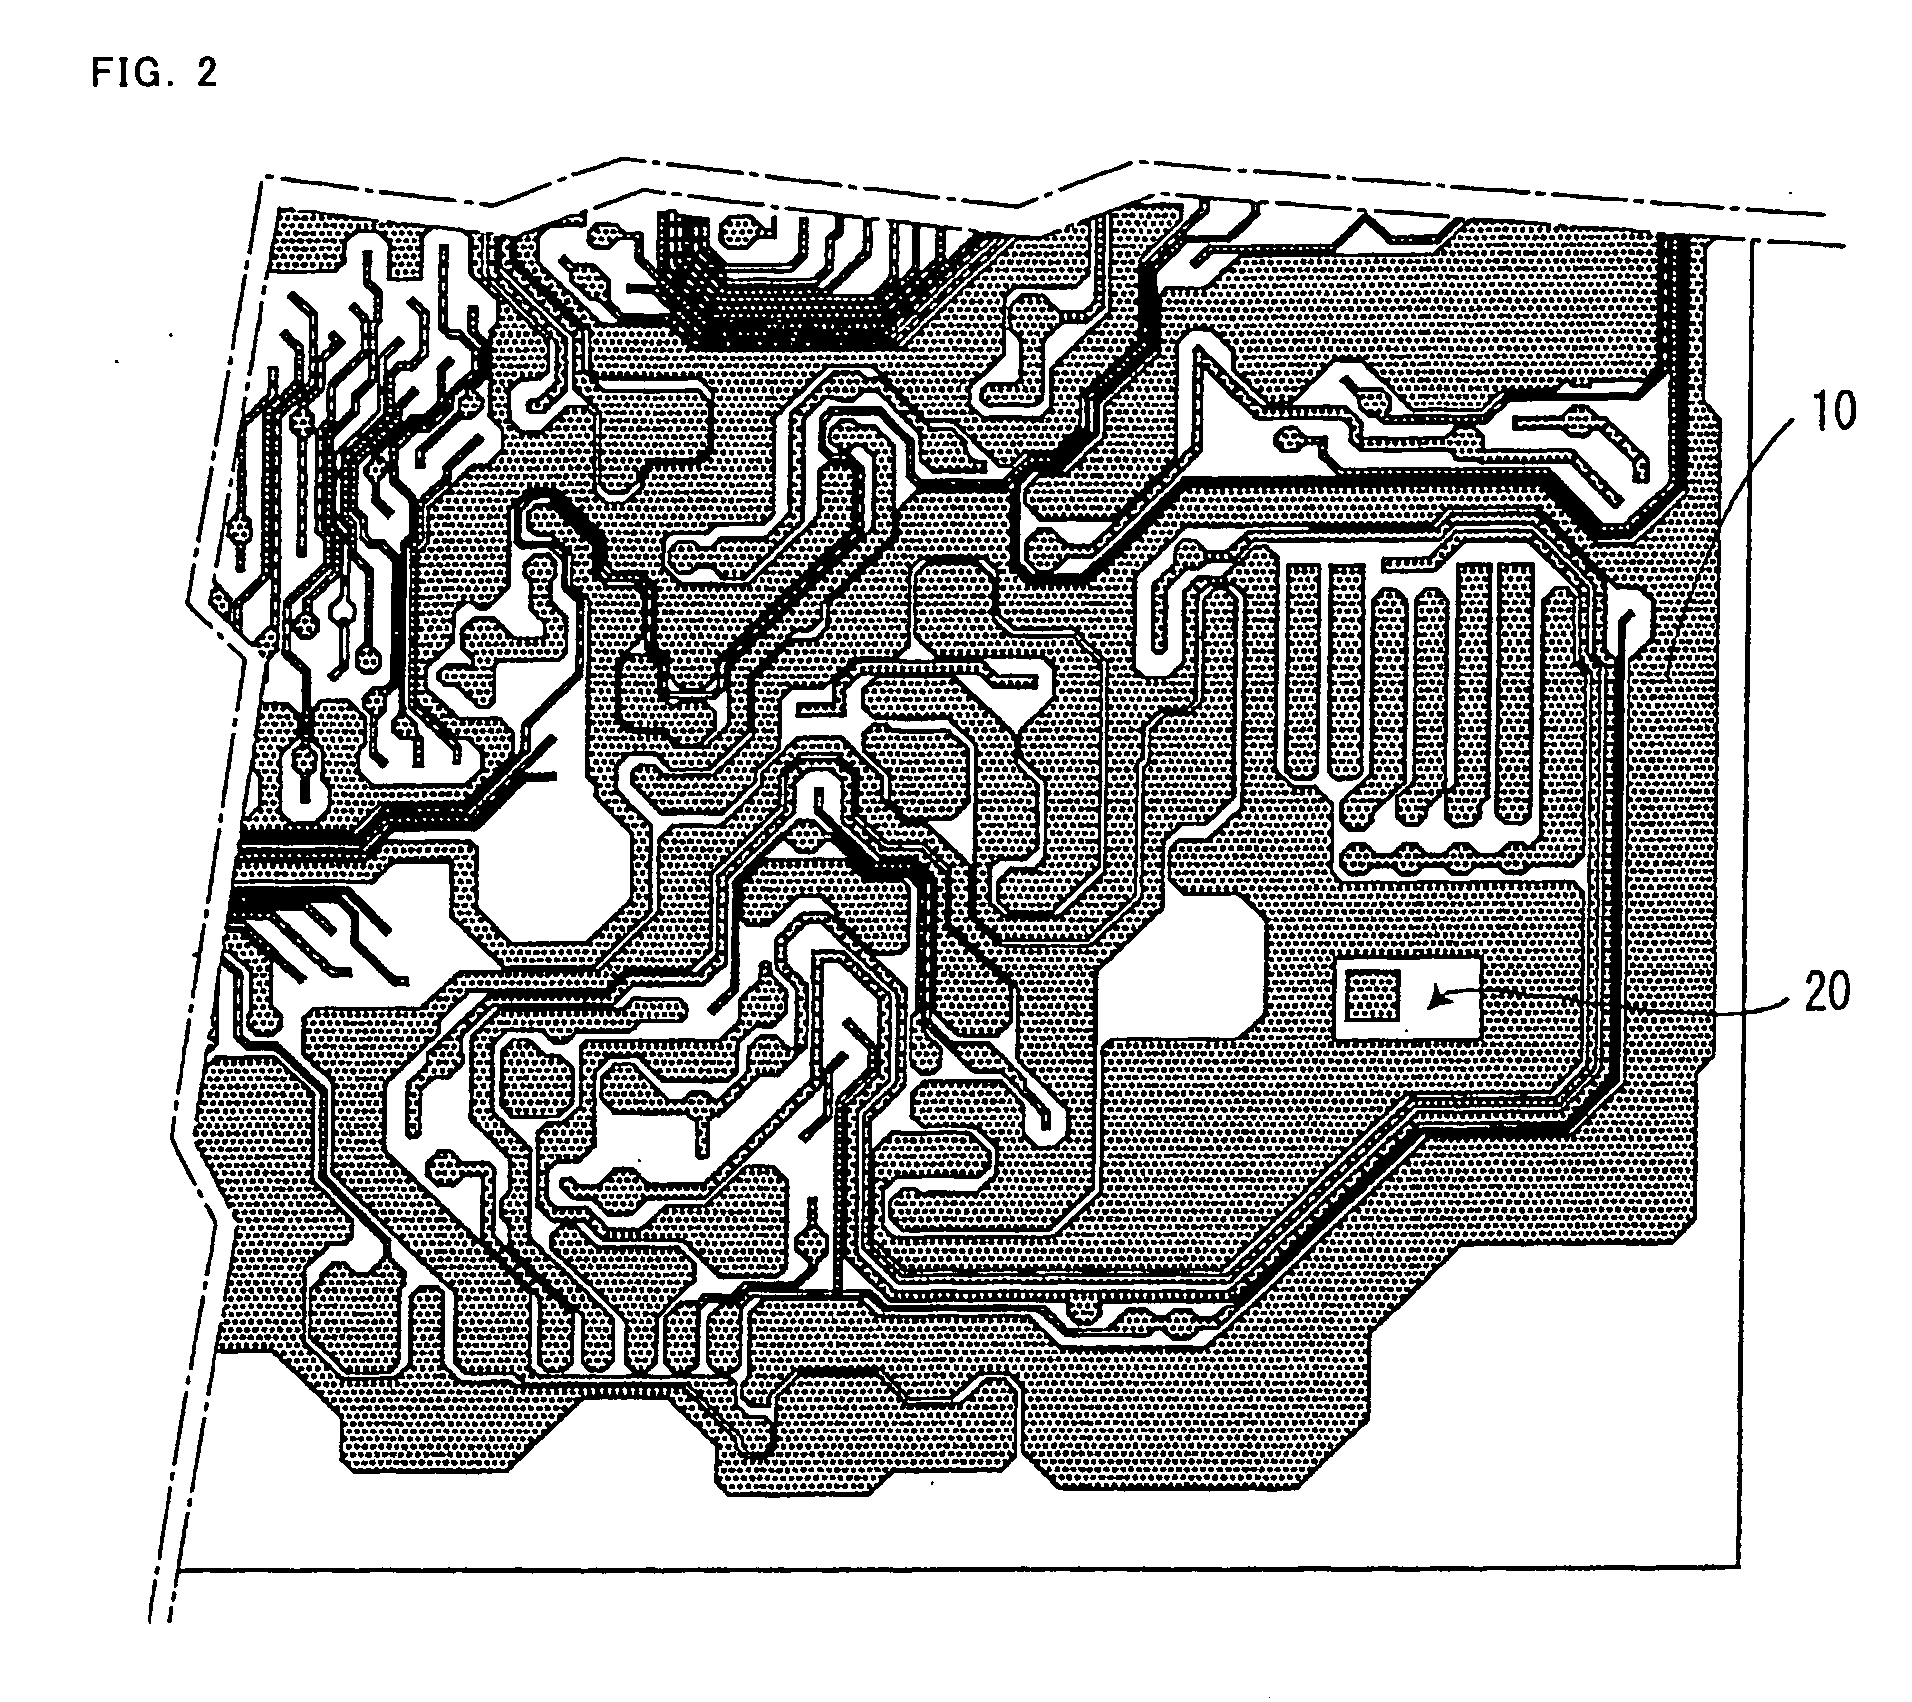 CAD system for a printed circuit board